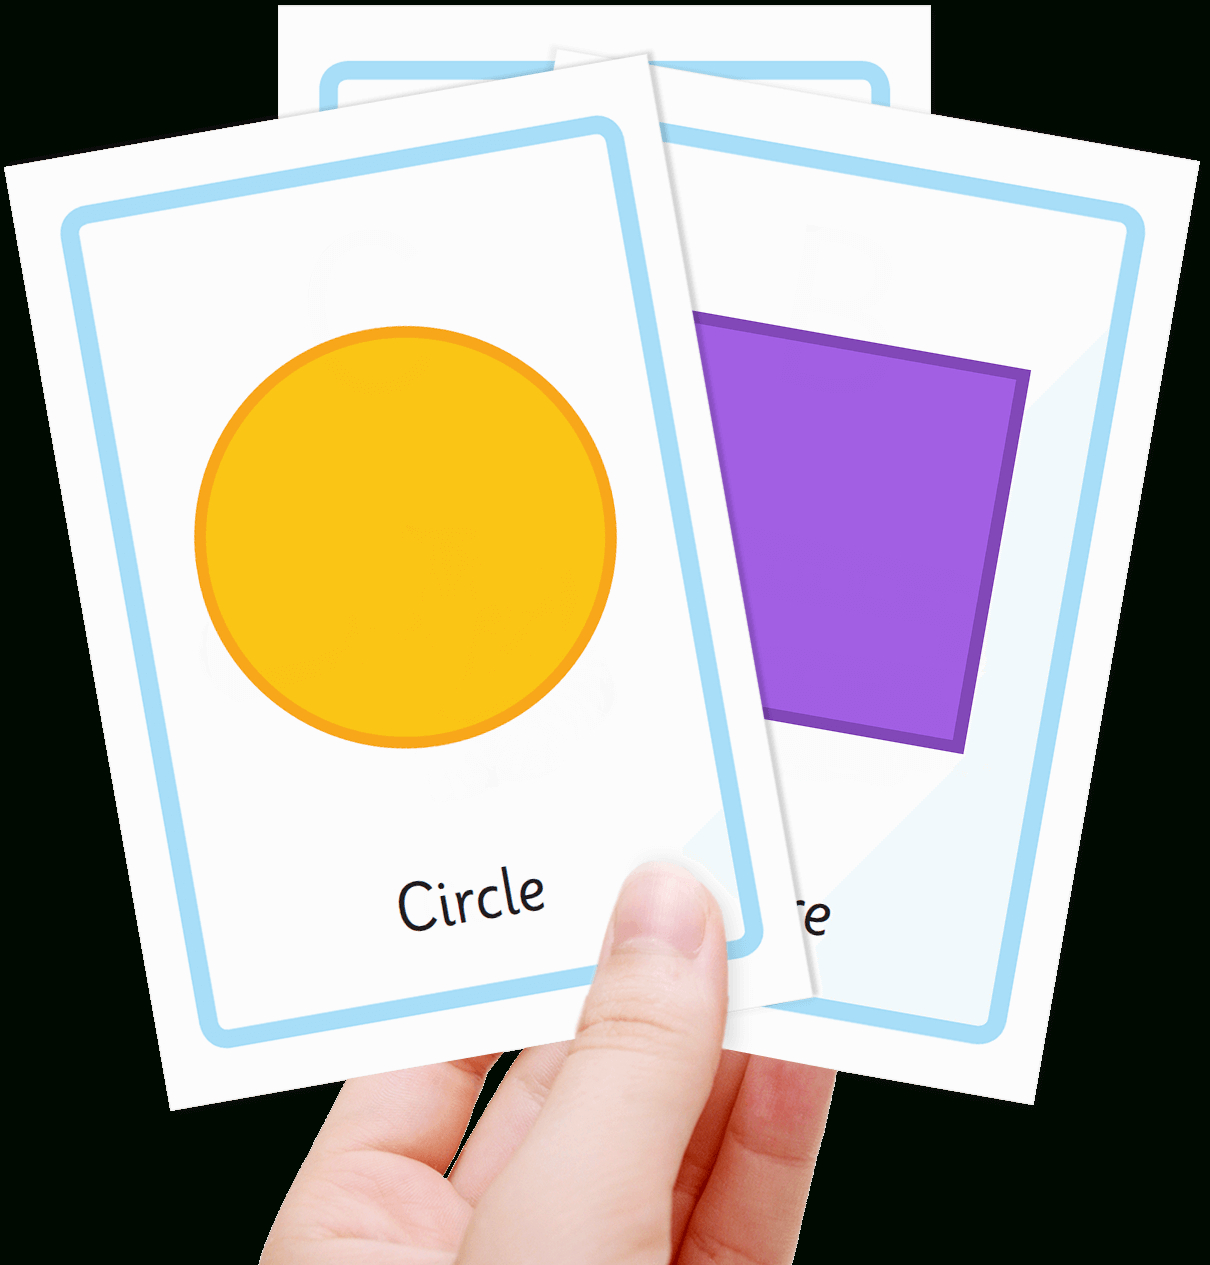 Free Shape Flashcards For Kids - Totcards - Free Printable Flashcards For Toddlers